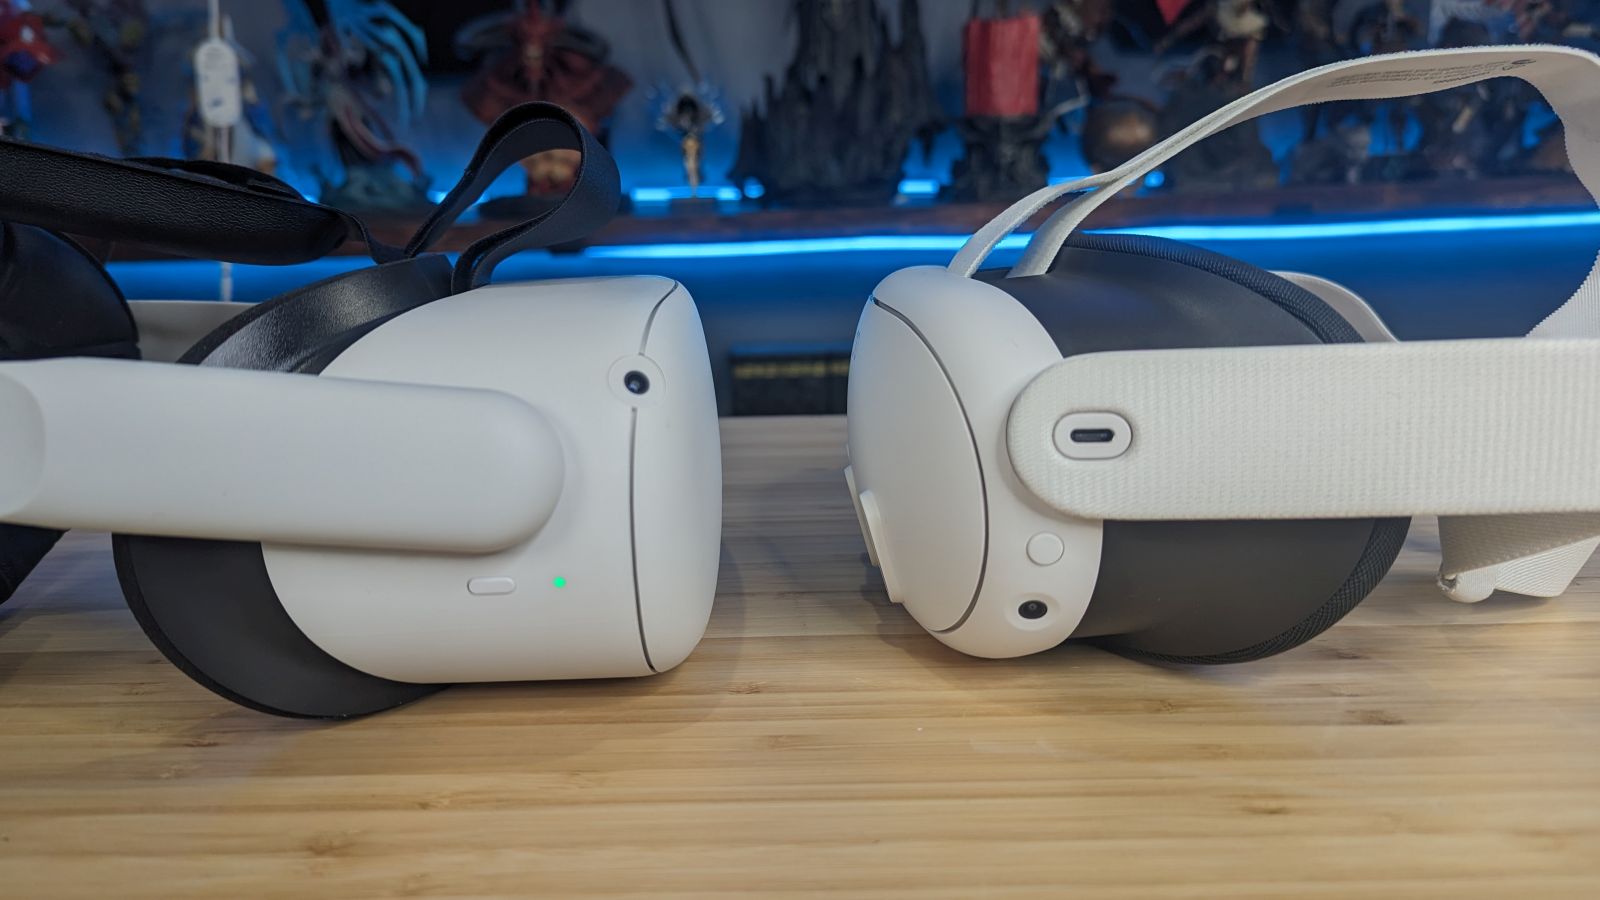 Should you buy a Quest 3 or Playstation VR 2?